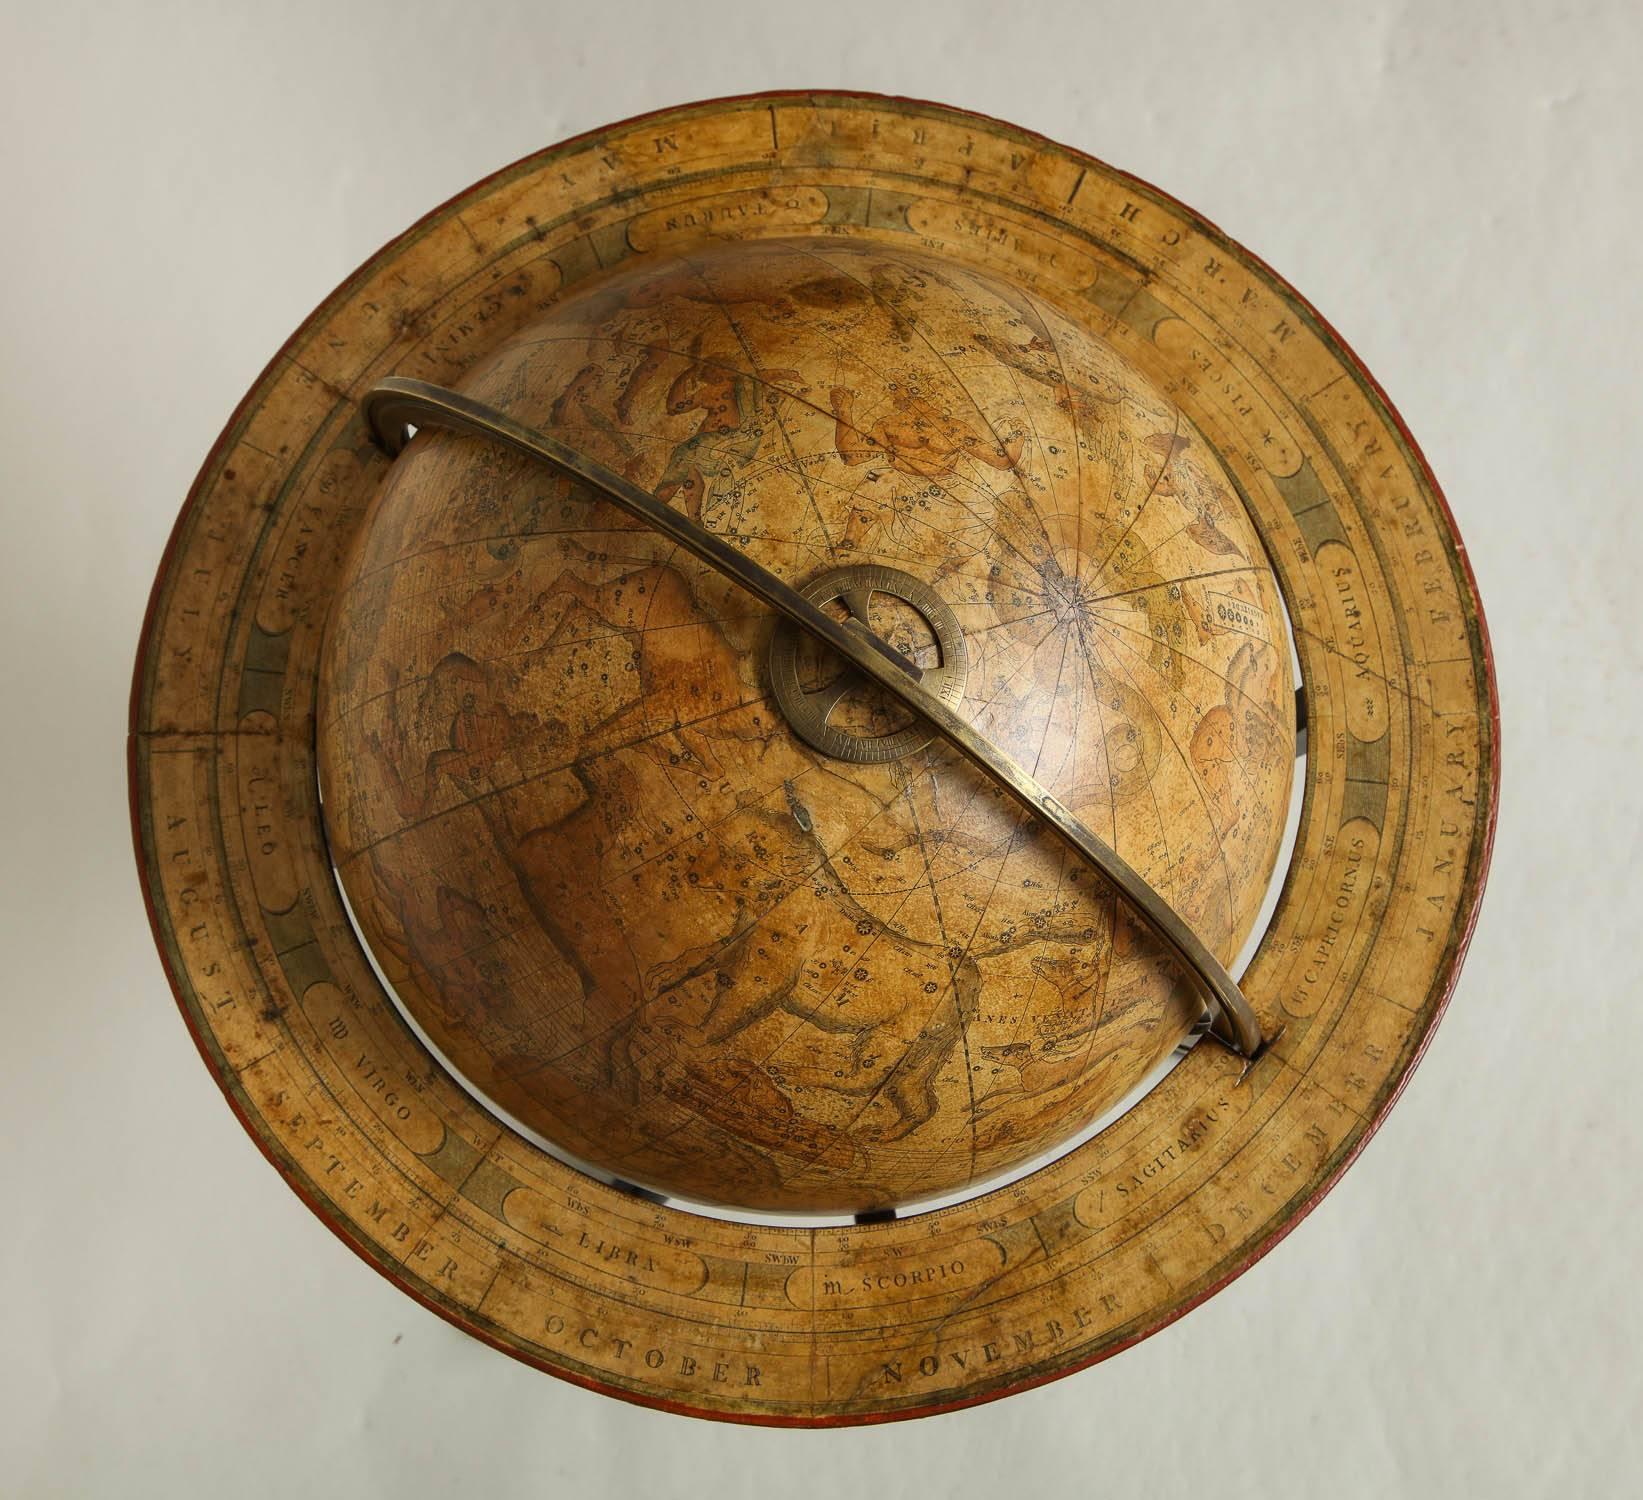 Fine Georgian Celestial globe by J. & W. Cary of London, circa 1800, the mahogany Stand with ring turned urn shaft and standing on slipper feet, with compass on lower tier, the whole in excellent antique condition.